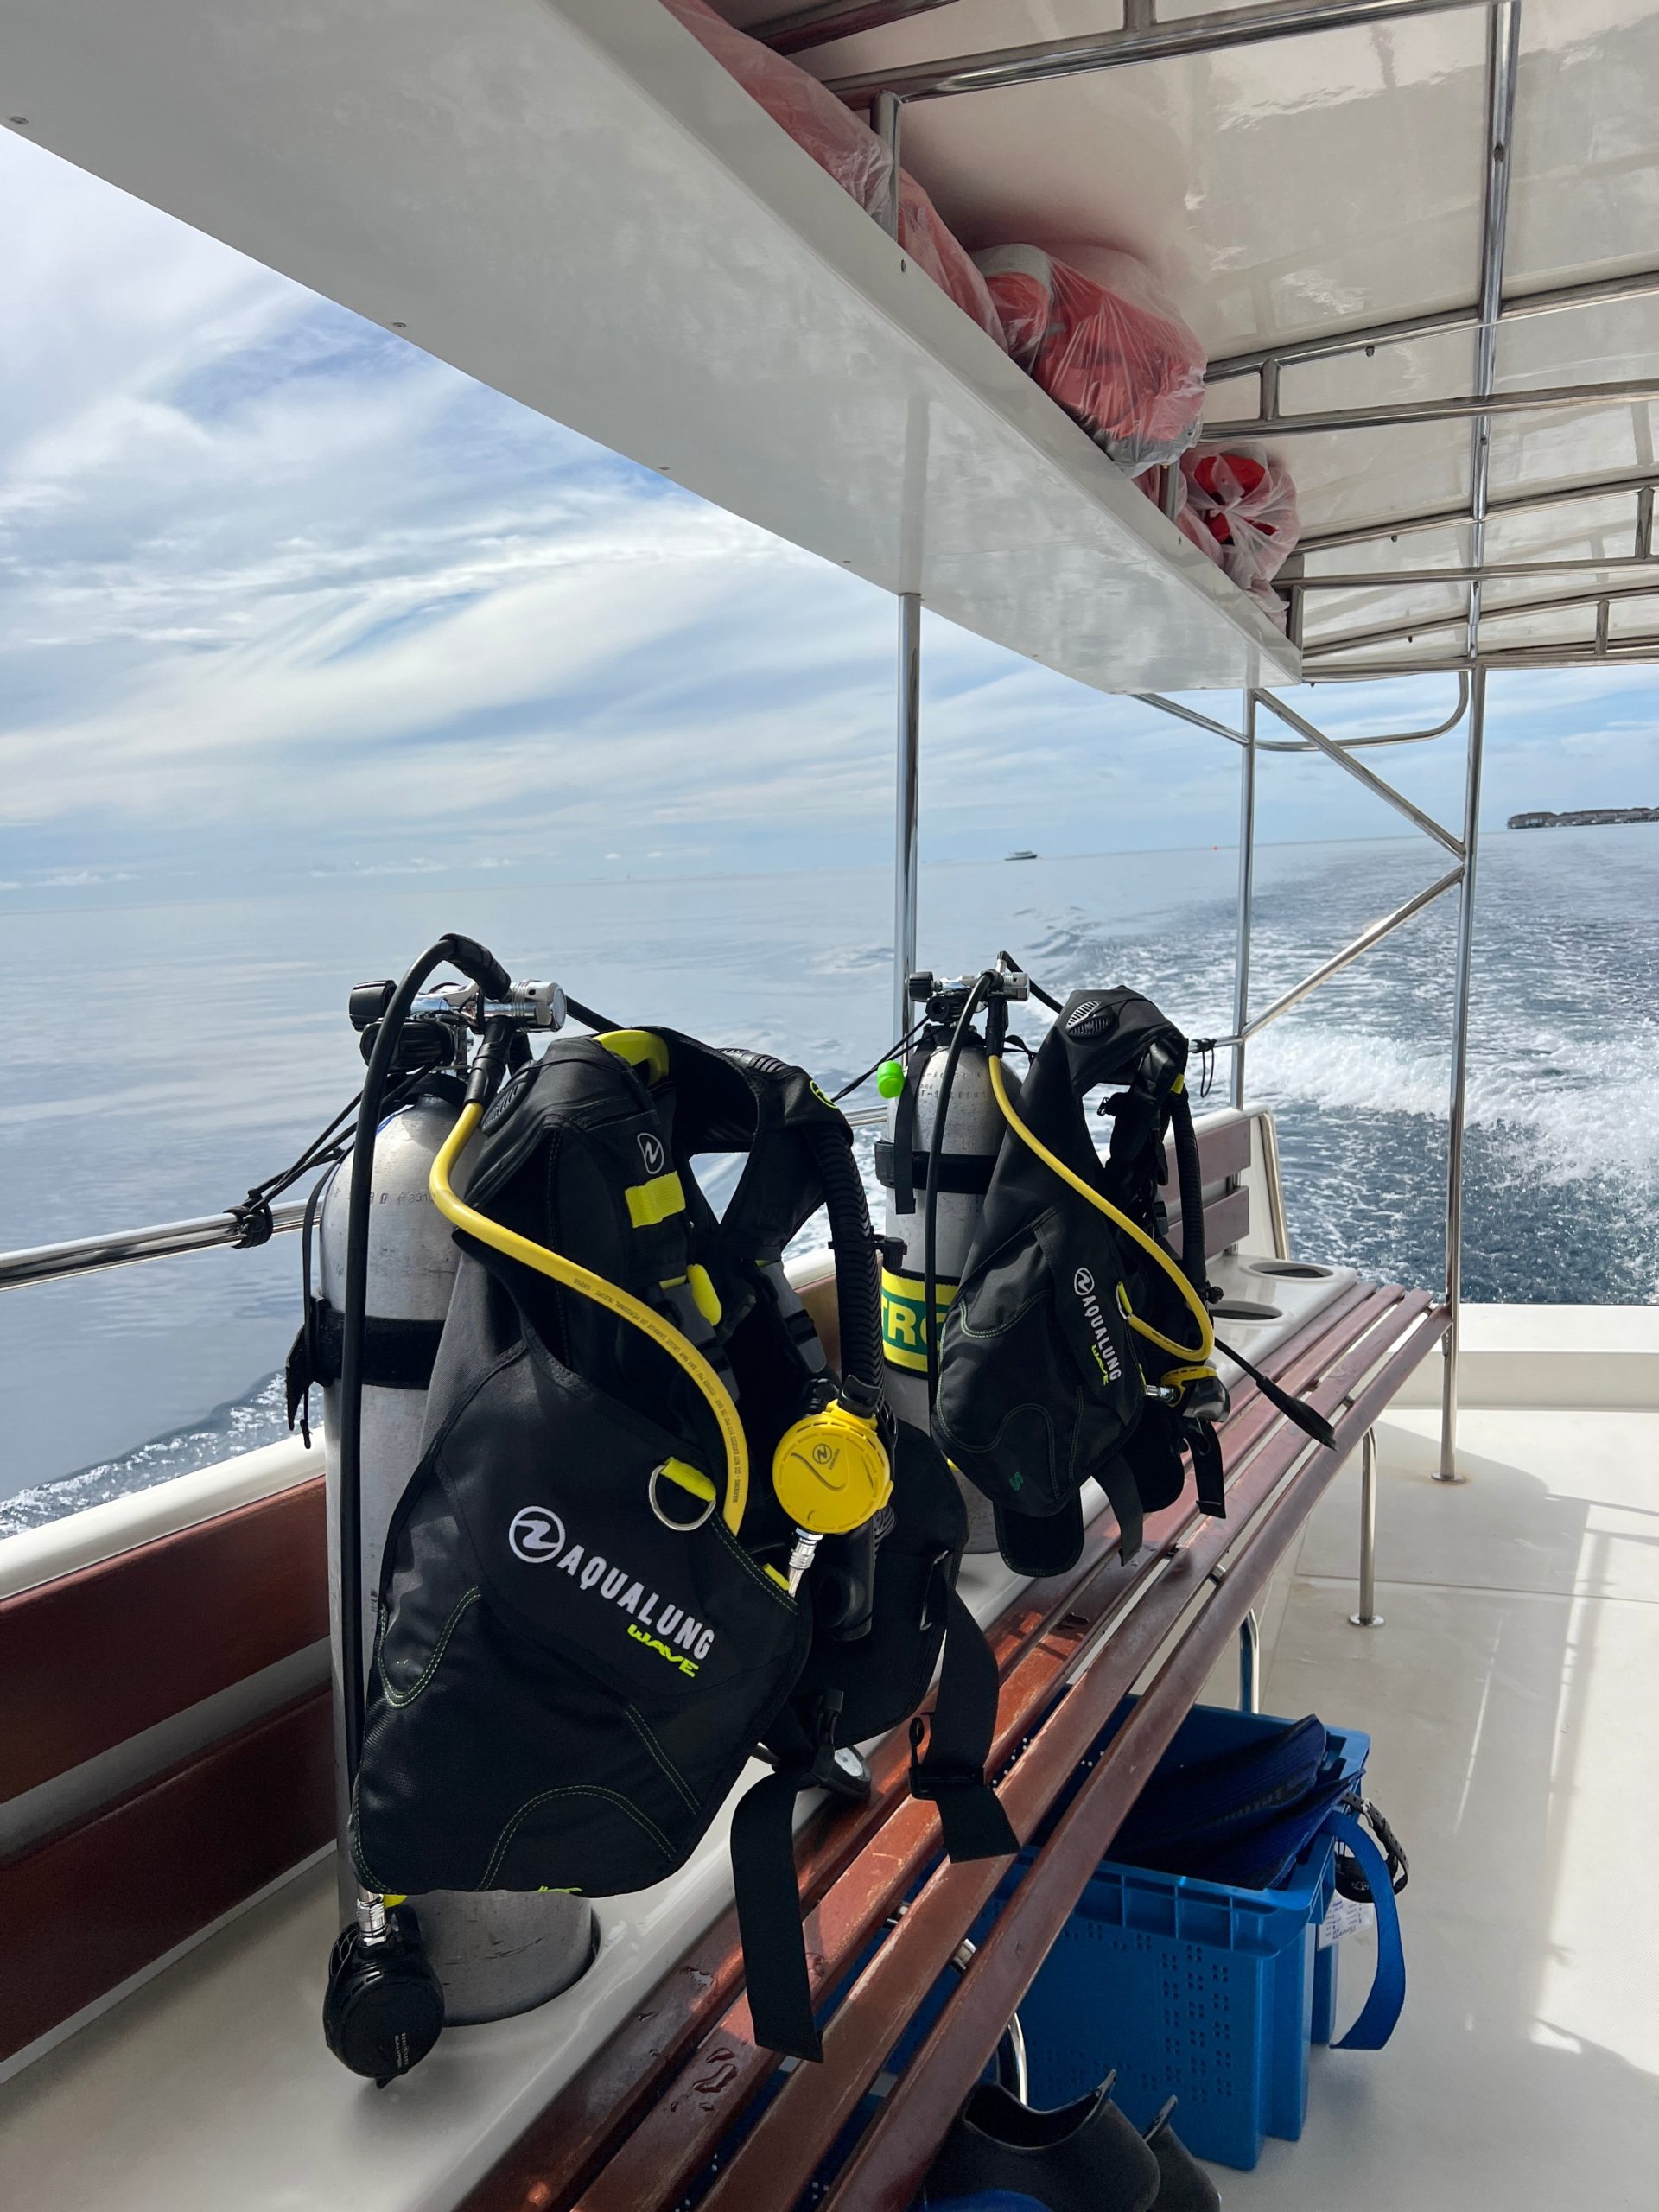 Scuba diving equipment on the side of a boat in the Maldives